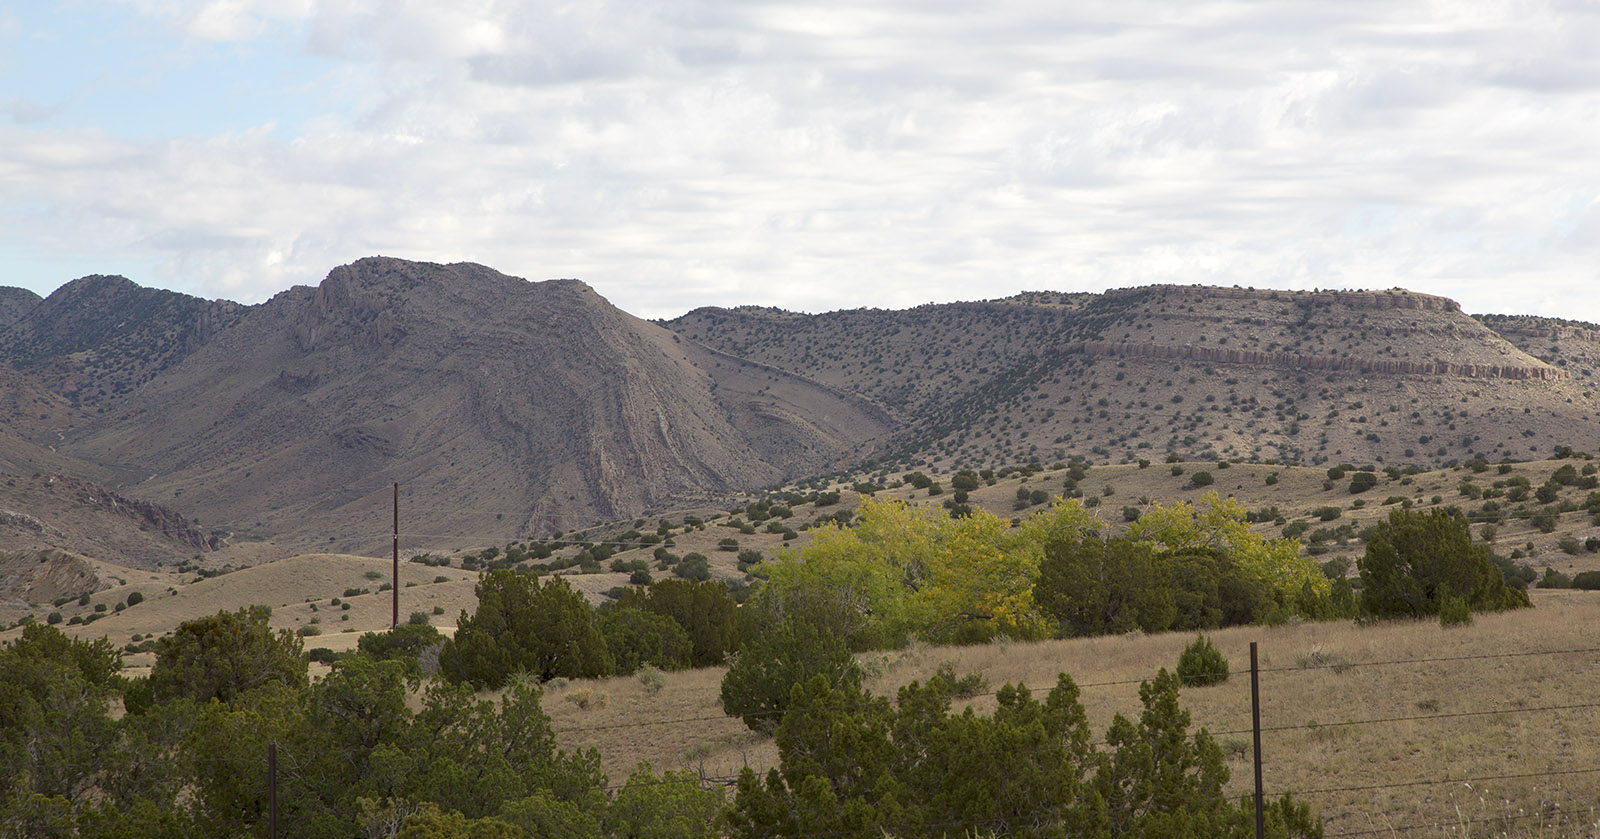 Uplifted, tilted and folded sedimentary strata in the southern end of the Manzano Mountains next to US Hwy 60.